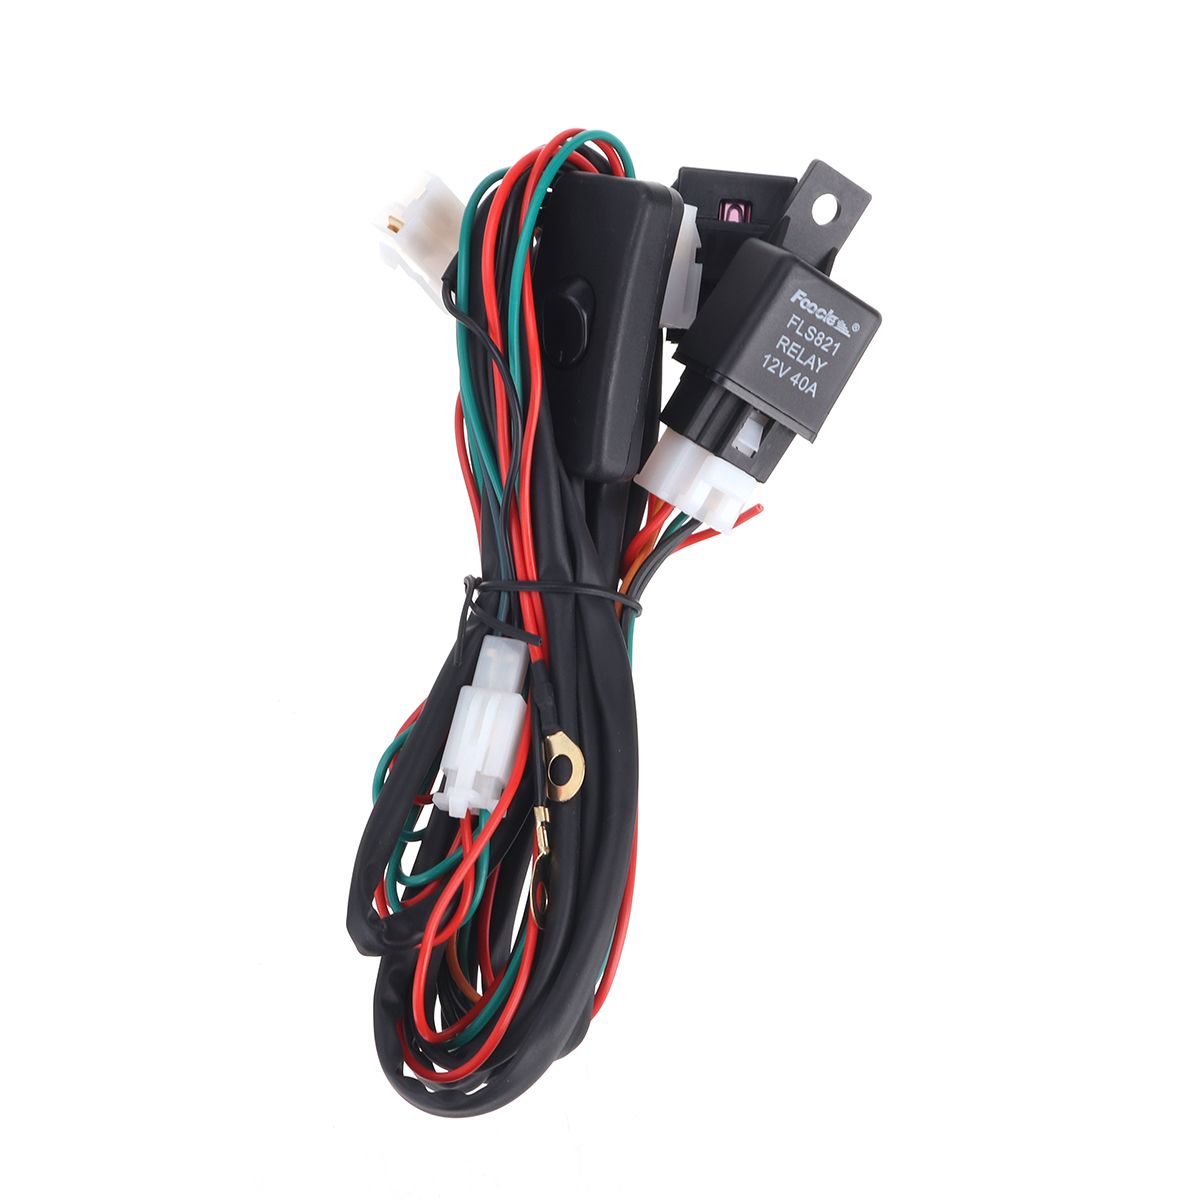 Car-Front-Bumper-Grille-Fog-Lights-DRL-Driving-Lamp-with-Switch-and-Harness-for-VW-Golf-MK4-1997-200-61018